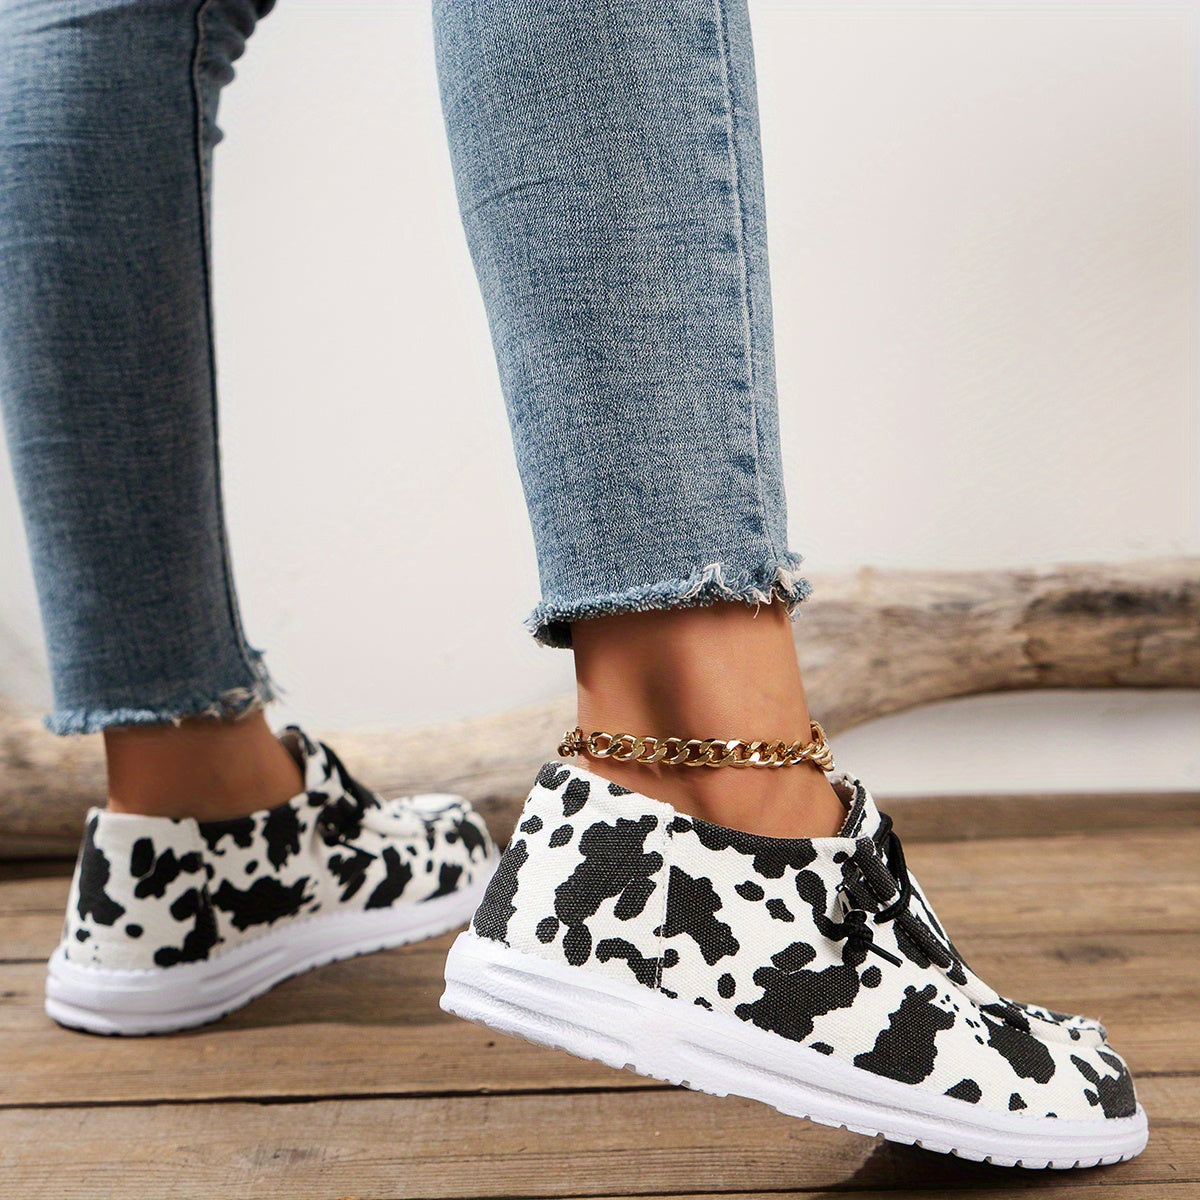 Women's Cow Pattern Canvas Shoes, Casual Lace Up Outdoor Shoes, Lightweight Low Top Sneakers